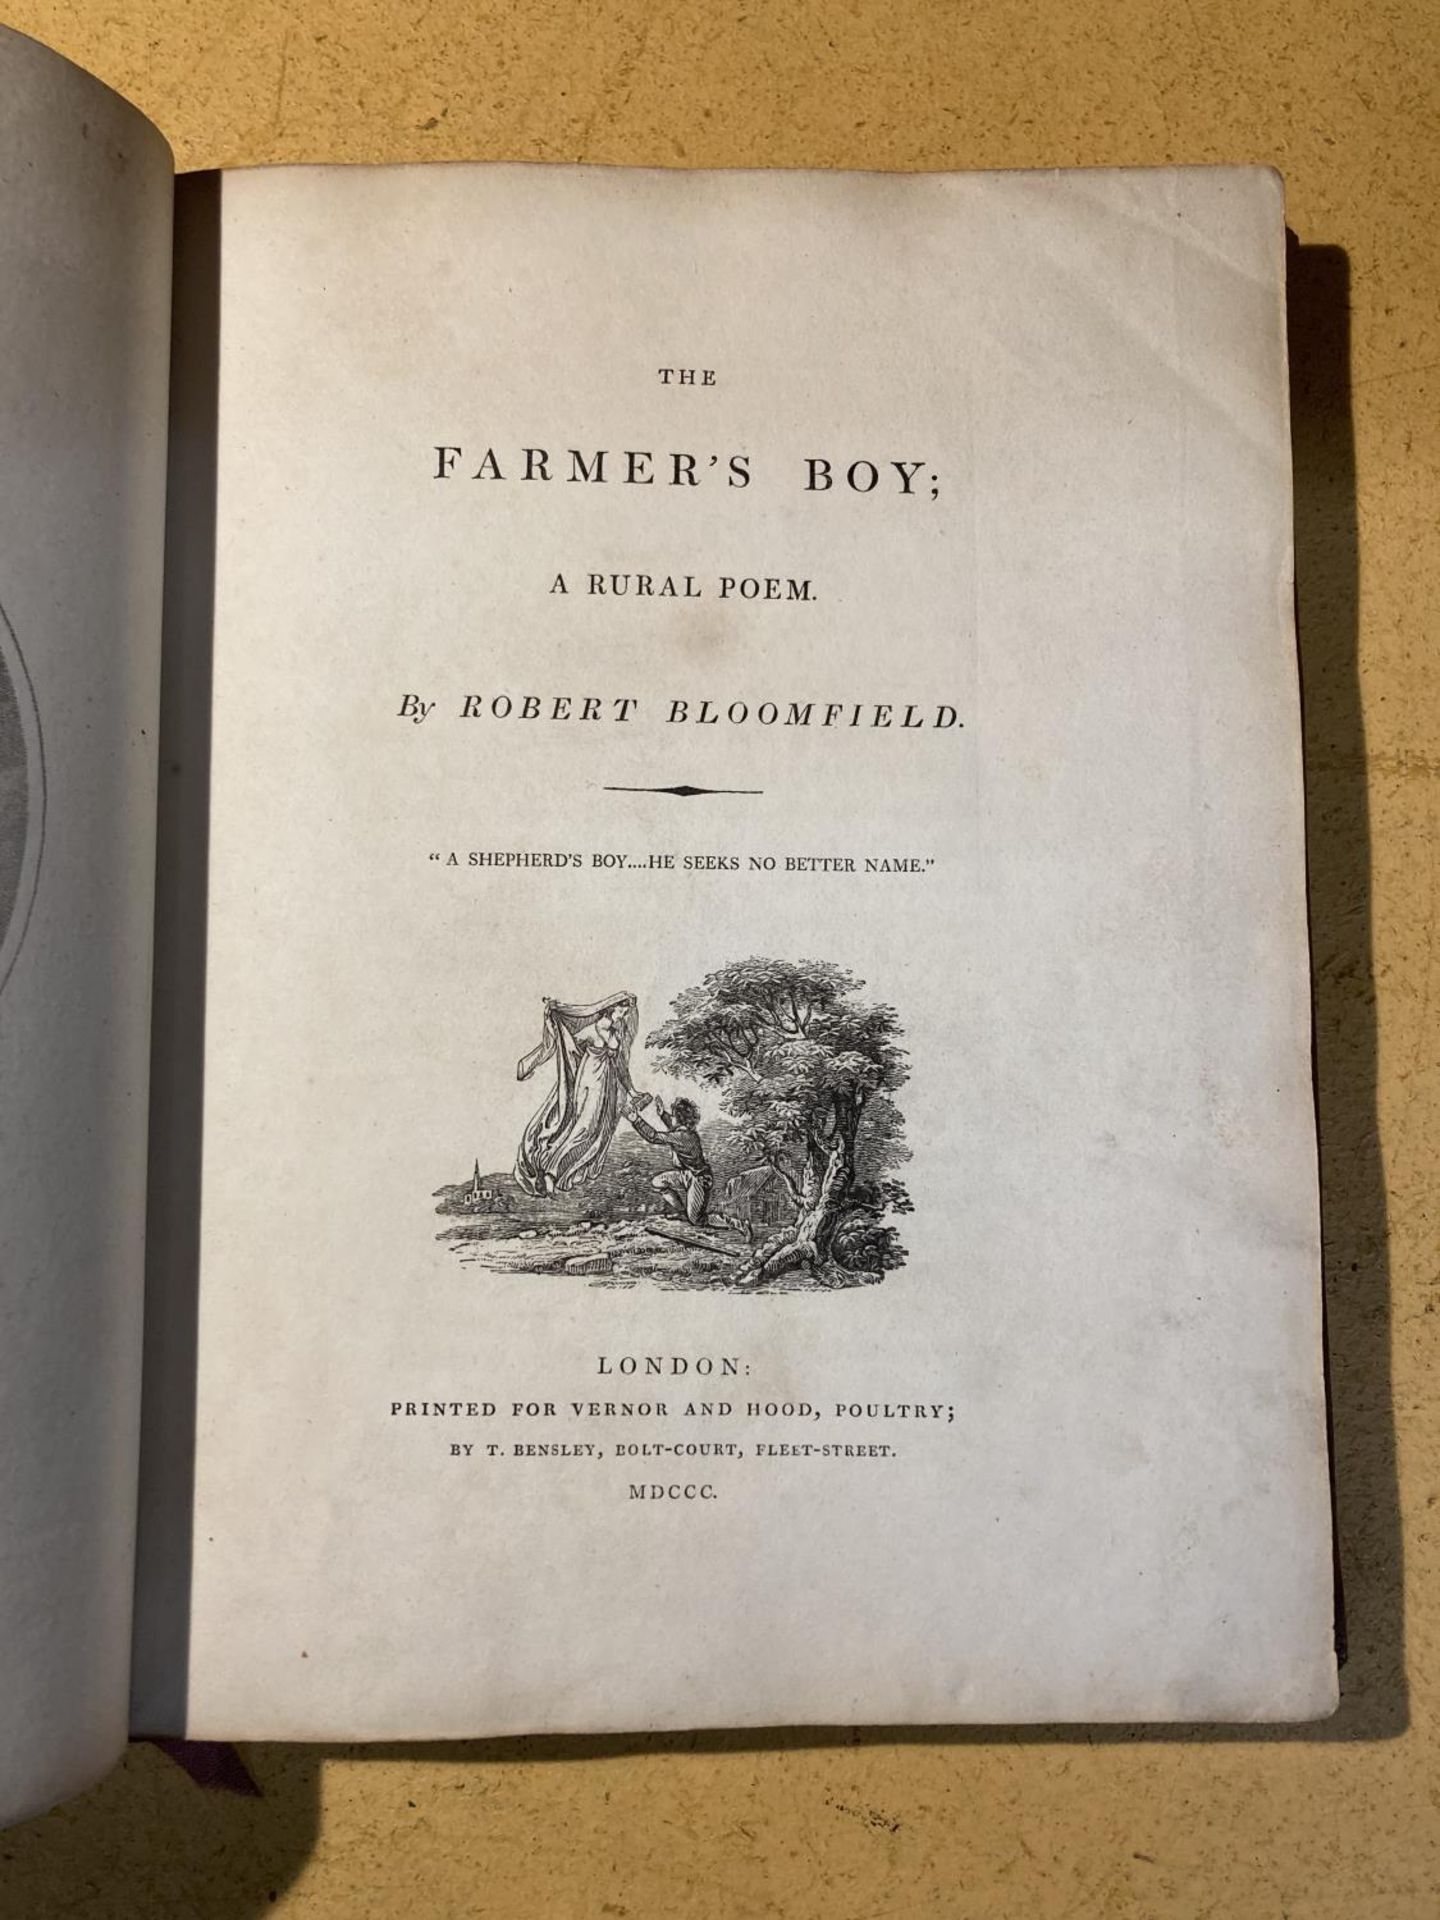 THE FARMERS BOY: A RURAL POEM - ROBERT BLOOMFIELD - 1800 PUBLISHED BY VERNOR & HOOD, REBOUND IN - Image 3 of 3